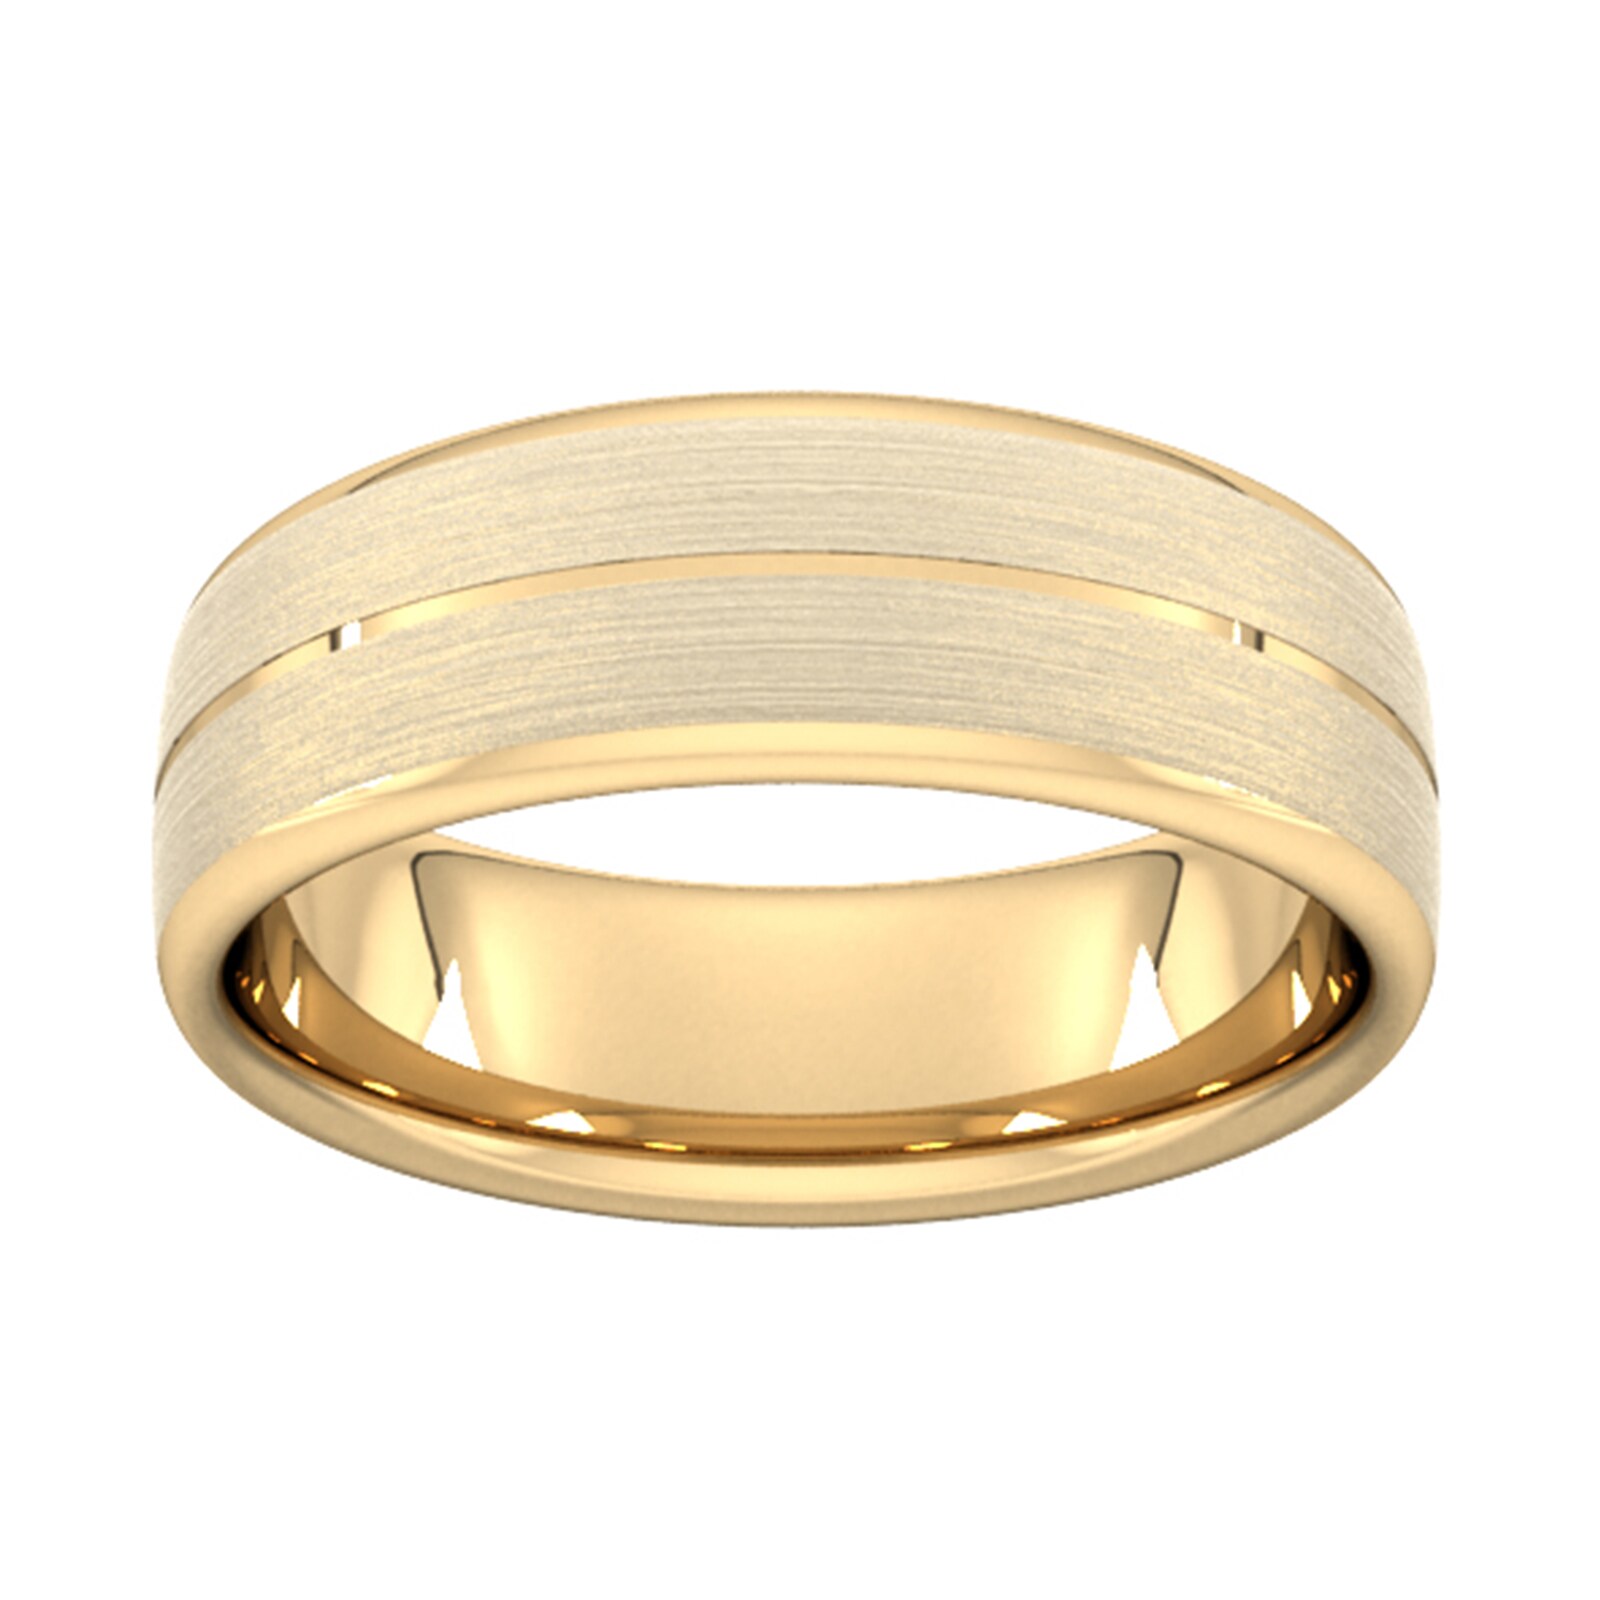 7mm Traditional Court Standard Centre Groove With Chamfered Edge Wedding Ring In 9 Carat Yellow Gold - Ring Size W